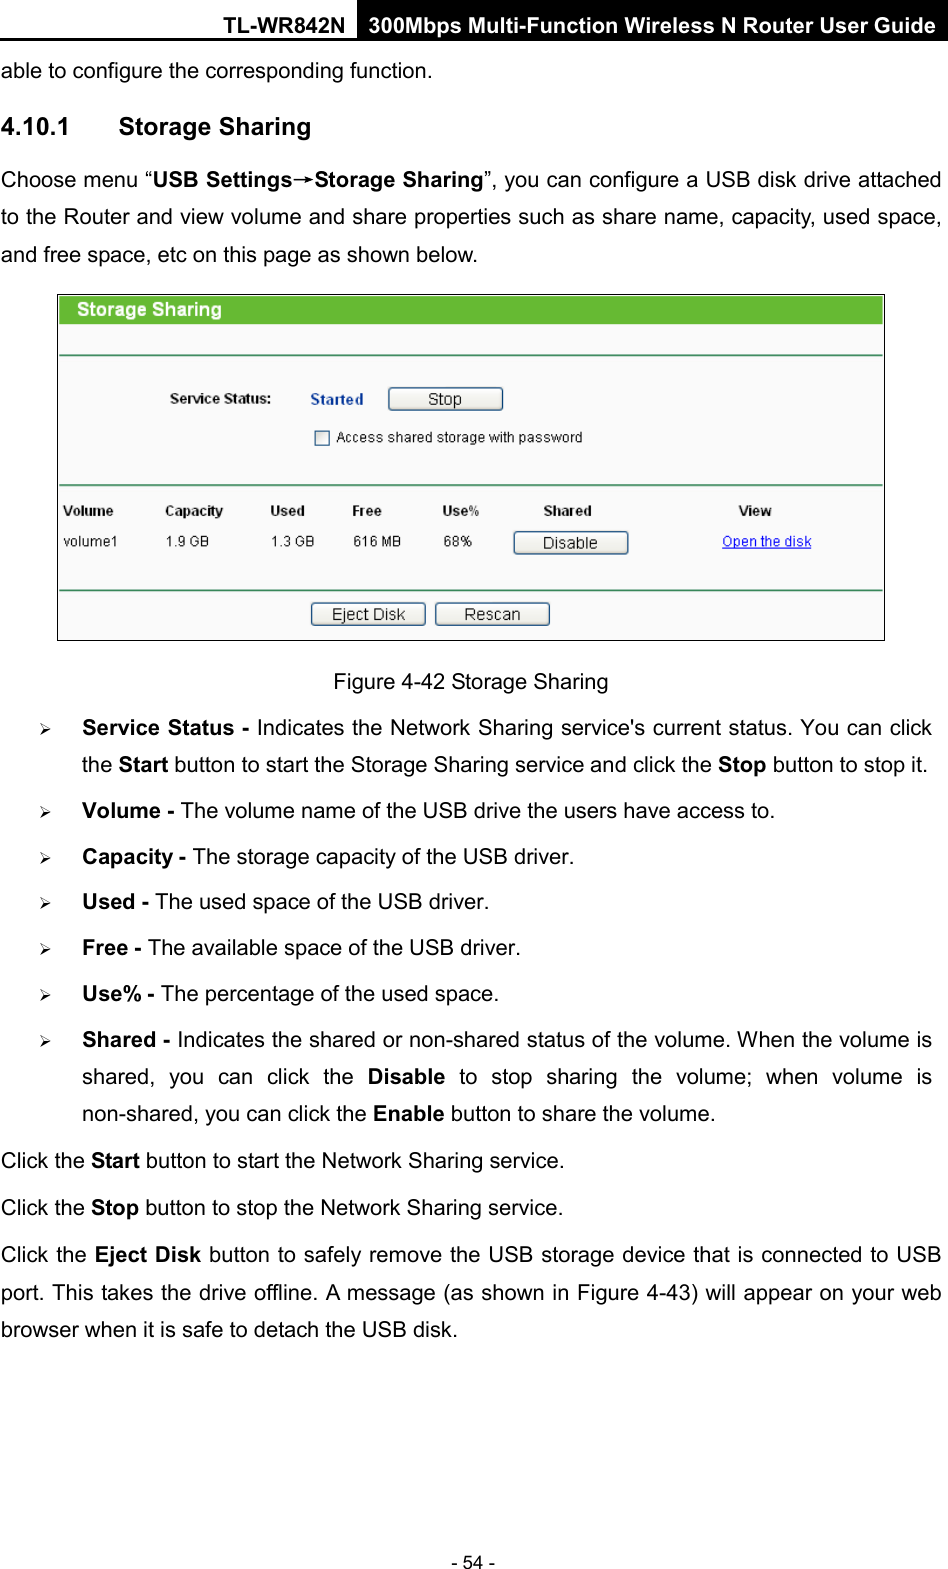 TL-WR842N 300Mbps Multi-Function Wireless N Router User Guide  - 54 - able to configure the corresponding function. 4.10.1 Storage Sharing Choose menu “USB Settings→Storage Sharing”, you can configure a USB disk drive attached to the Router and view volume and share properties such as share name, capacity, used space, and free space, etc on this page as shown below.  Figure 4-42 Storage Sharing  Service Status - Indicates the Network Sharing service&apos;s current status. You can click the Start button to start the Storage Sharing service and click the Stop button to stop it.    Volume - The volume name of the USB drive the users have access to.    Capacity - The storage capacity of the USB driver.    Used - The used space of the USB driver.    Free - The available space of the USB driver.    Use% - The percentage of the used space.    Shared - Indicates the shared or non-shared status of the volume. When the volume is shared, you can click the Disable  to  stop sharing the volume; when volume is non-shared, you can click the Enable button to share the volume. Click the Start button to start the Network Sharing service.   Click the Stop button to stop the Network Sharing service.   Click the Eject Disk button to safely remove the USB storage device that is connected to USB port. This takes the drive offline. A message (as shown in Figure 4-43) will appear on your web browser when it is safe to detach the USB disk.   